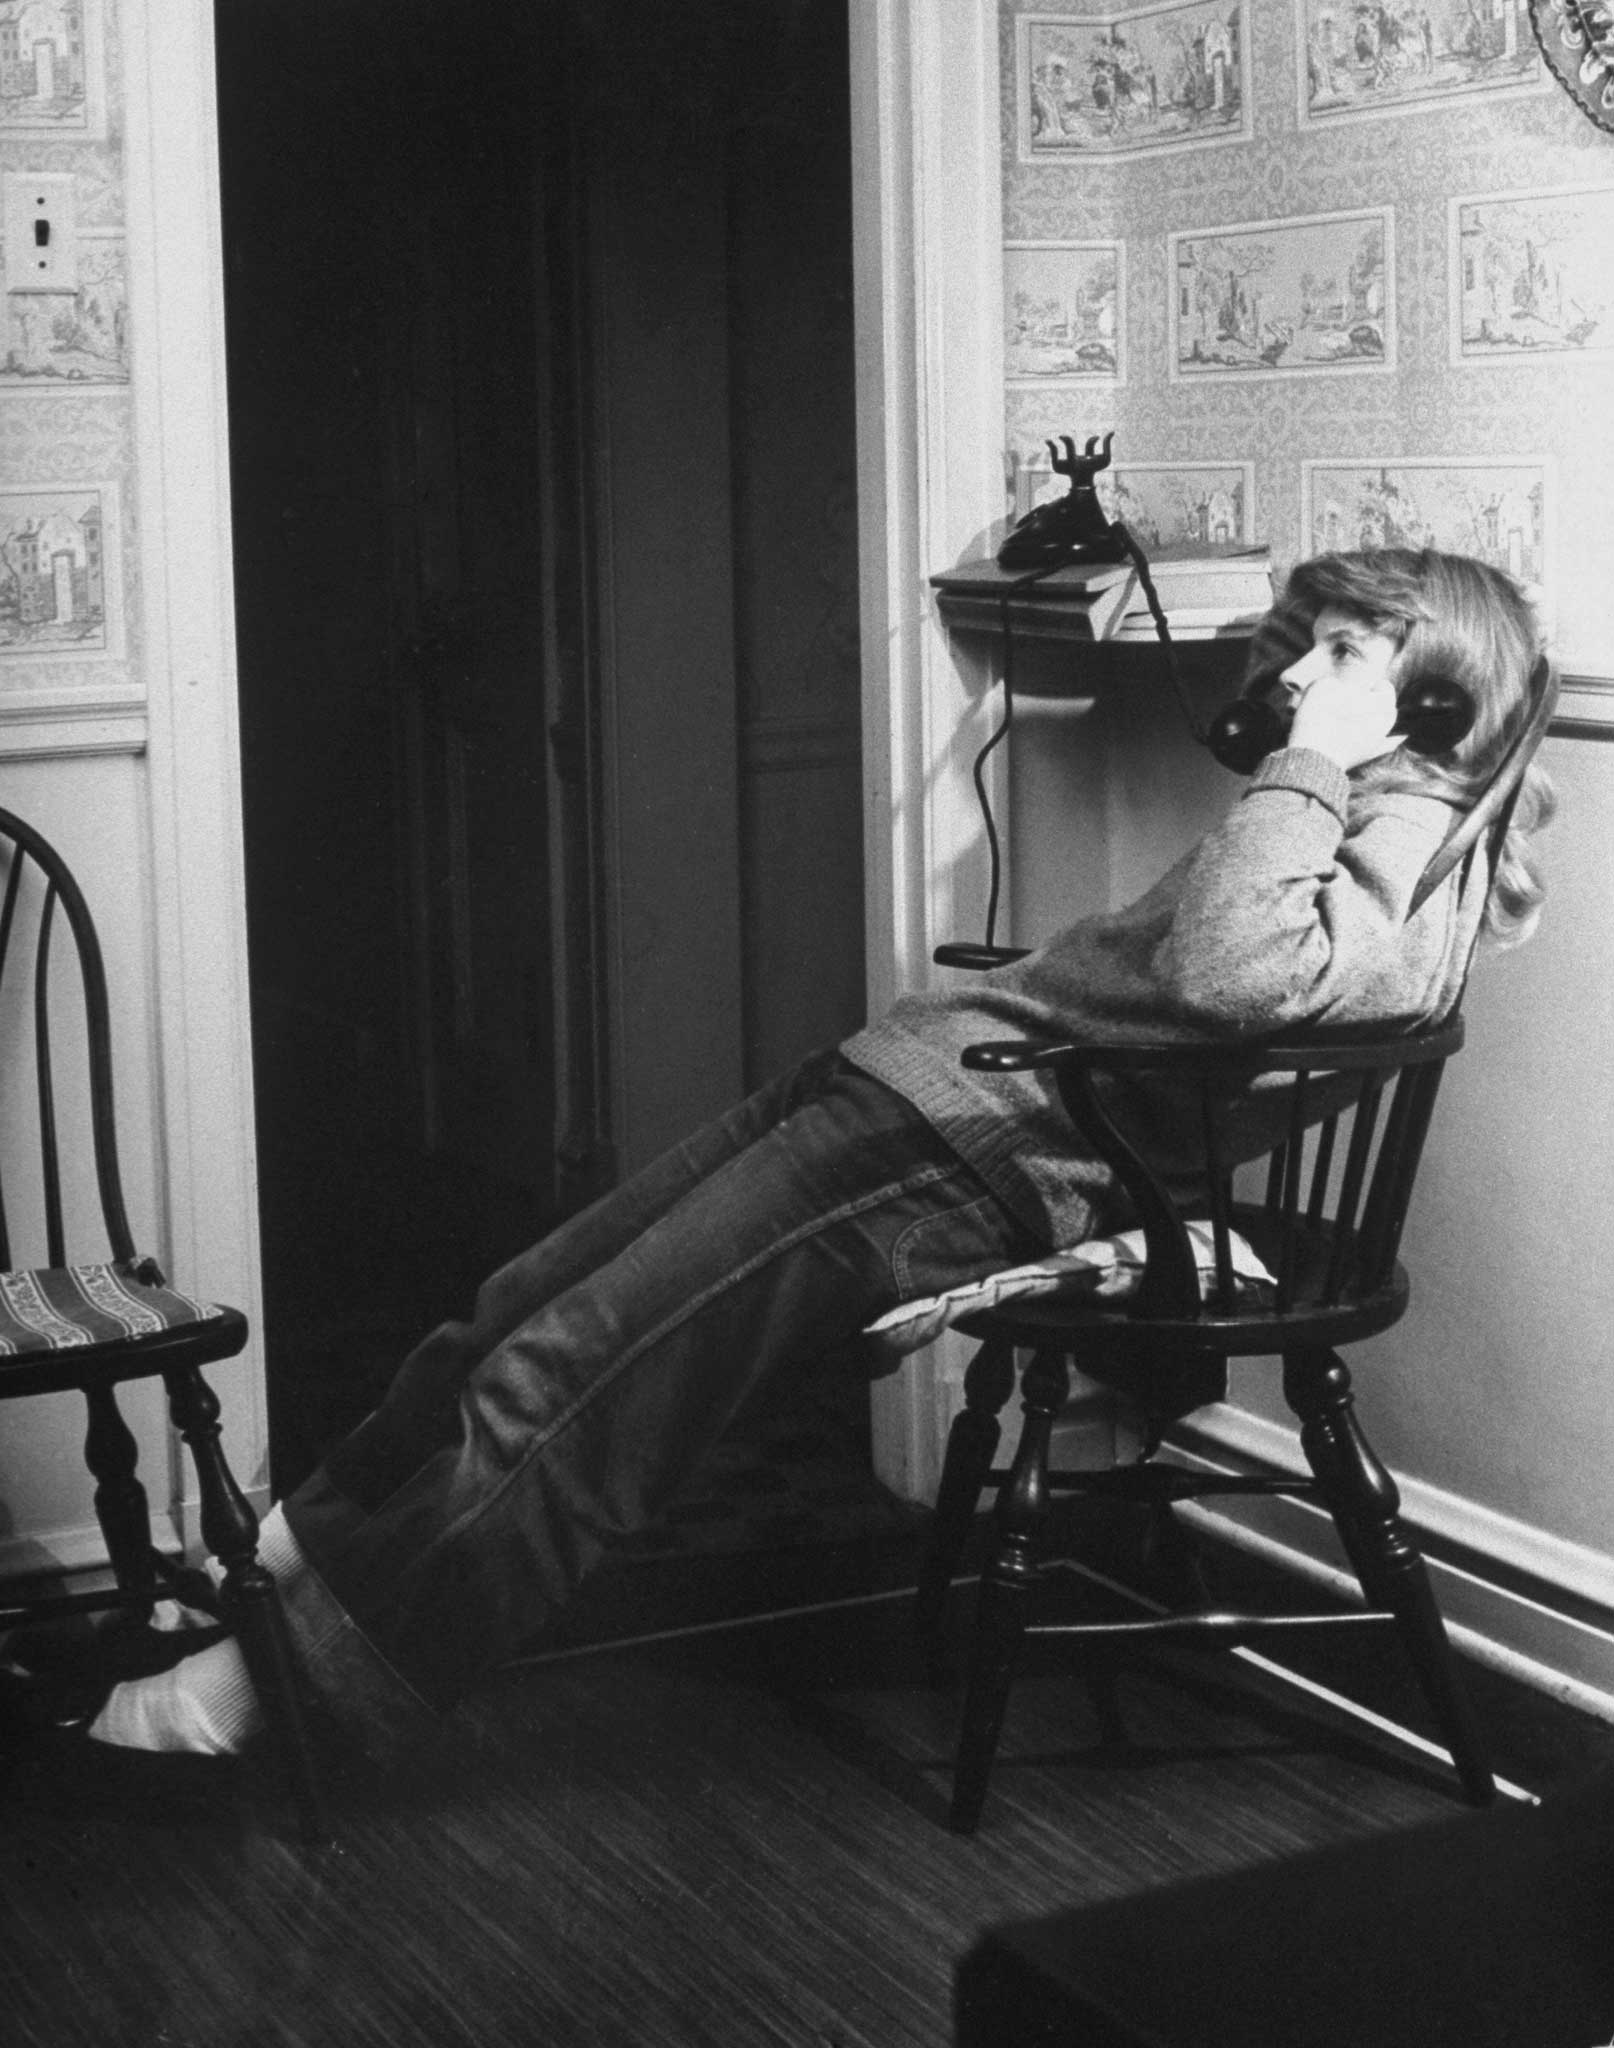 One of a series of pictures from the Dec. 11, 1944, issue of LIFE depicting a teenage girl on the phone.